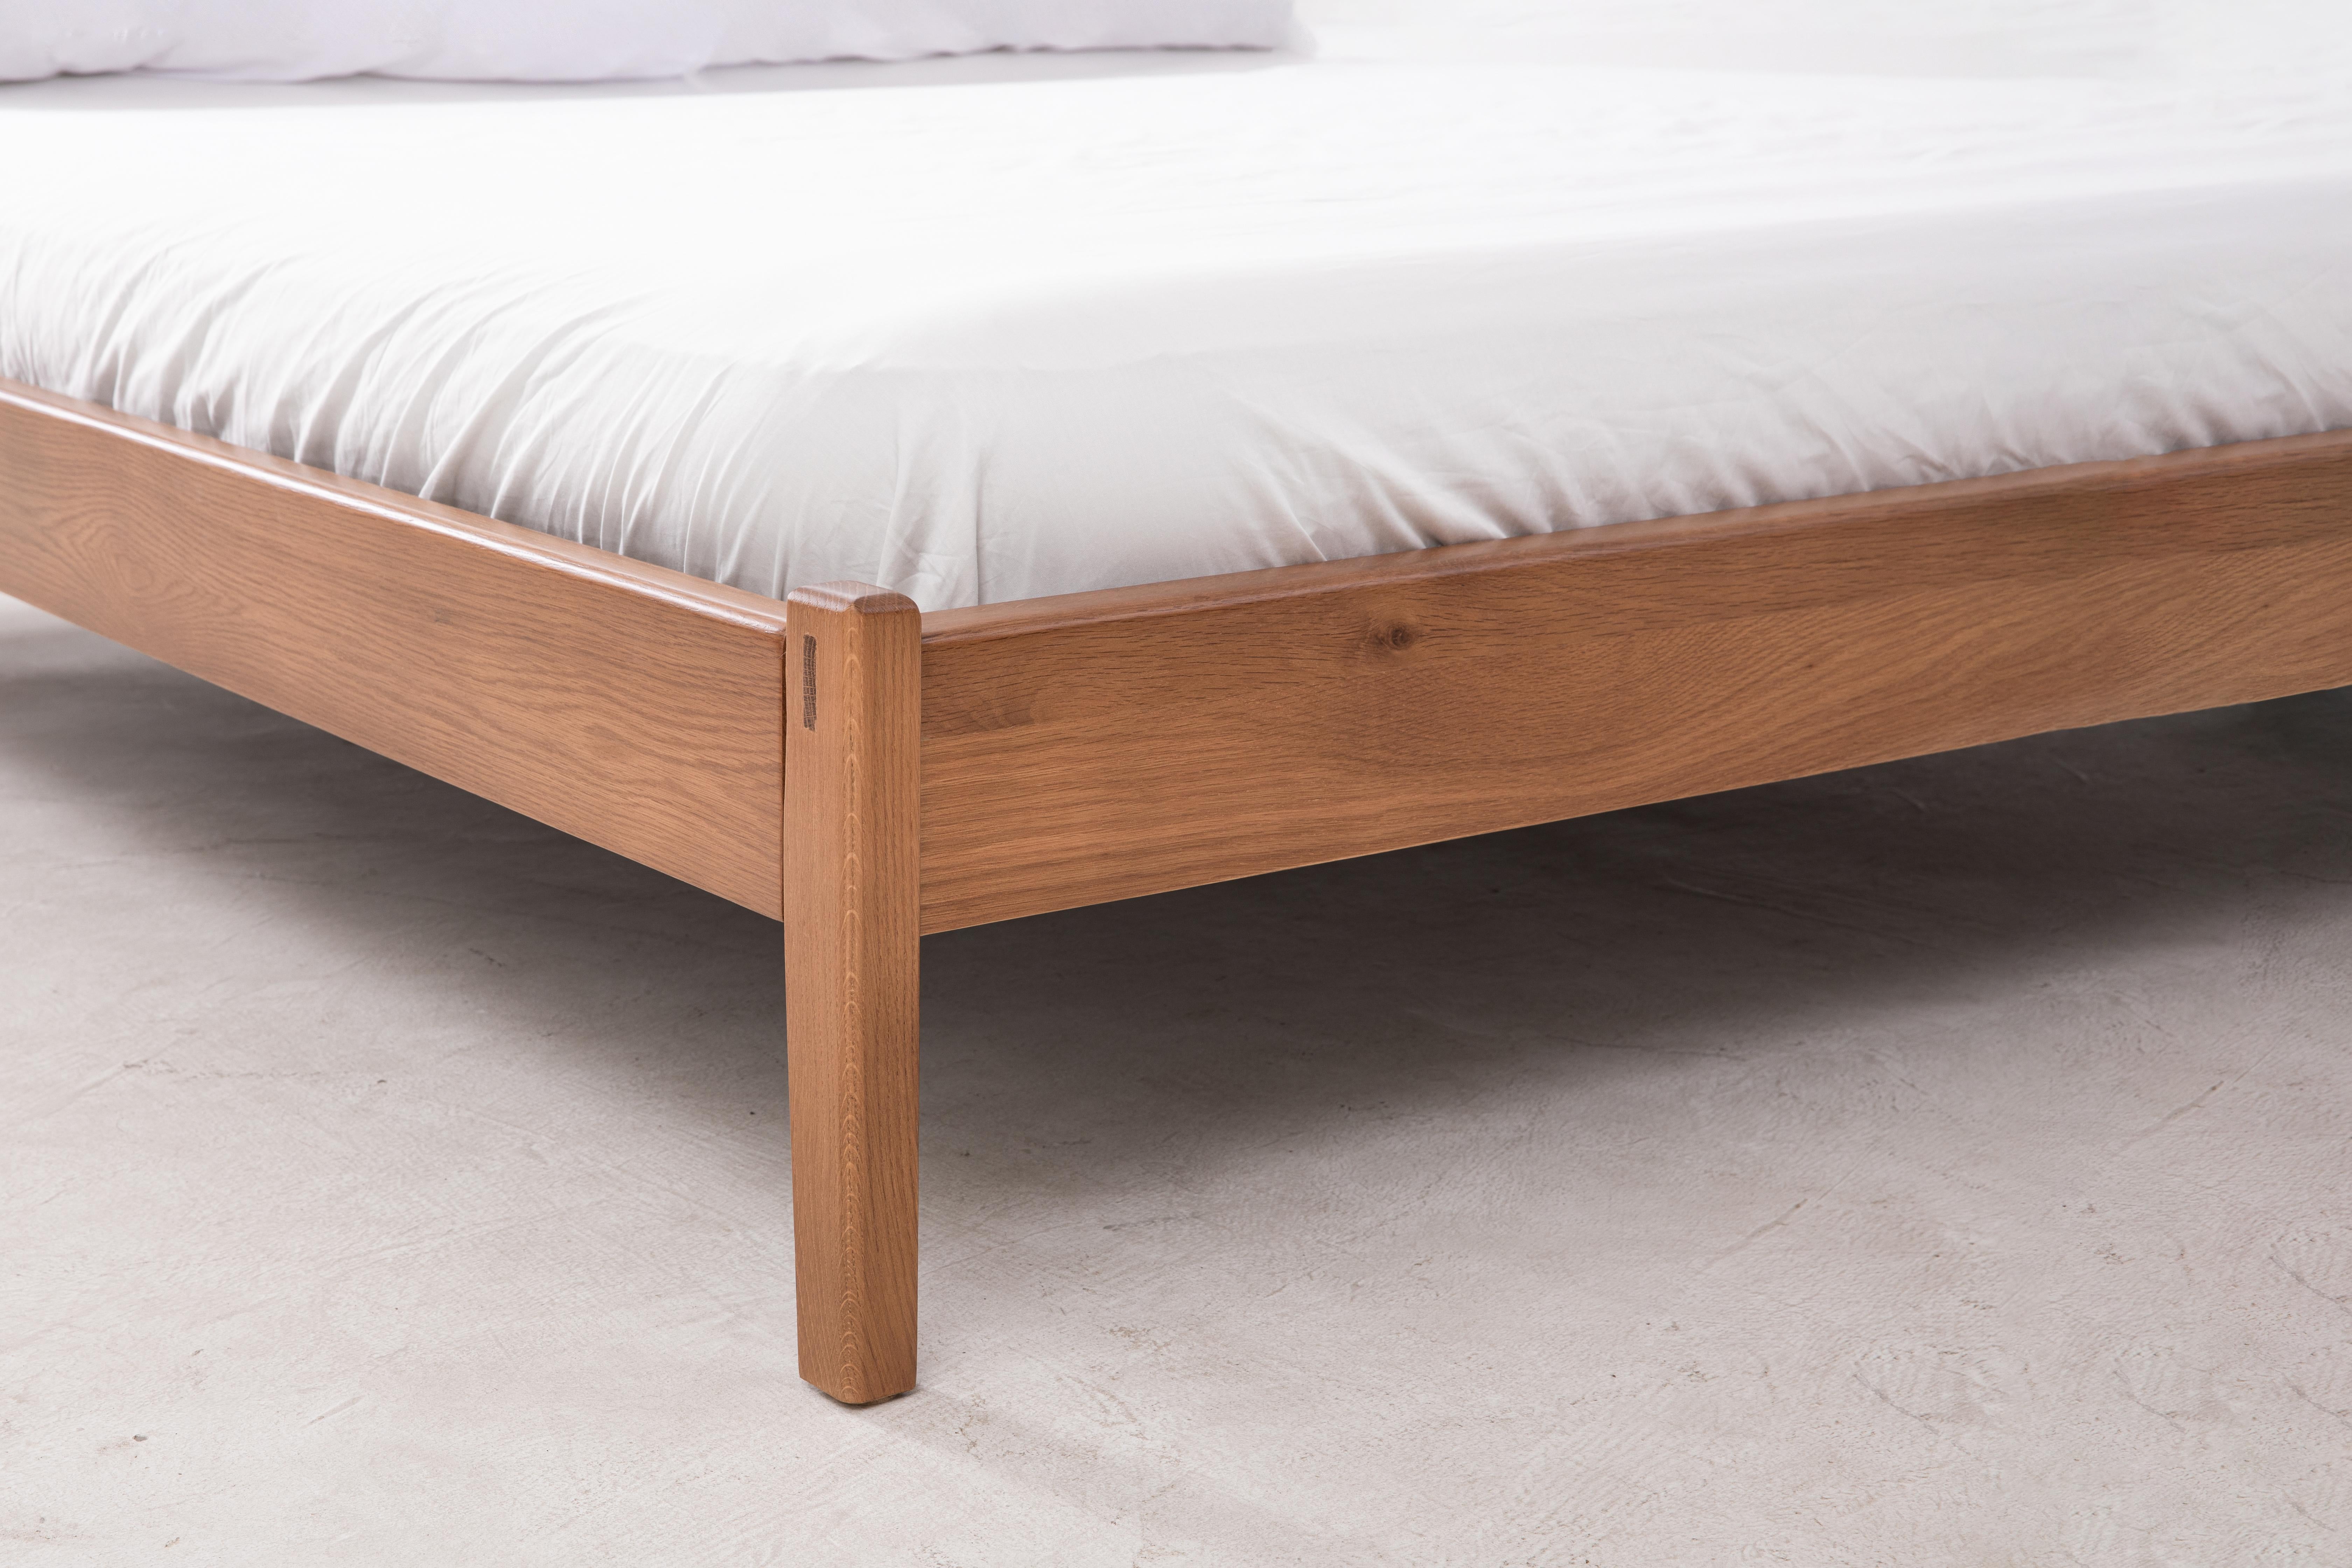 Chinese Plume King Bed in Sienna by Sun at Six, Minimalist Wood Bed For Sale